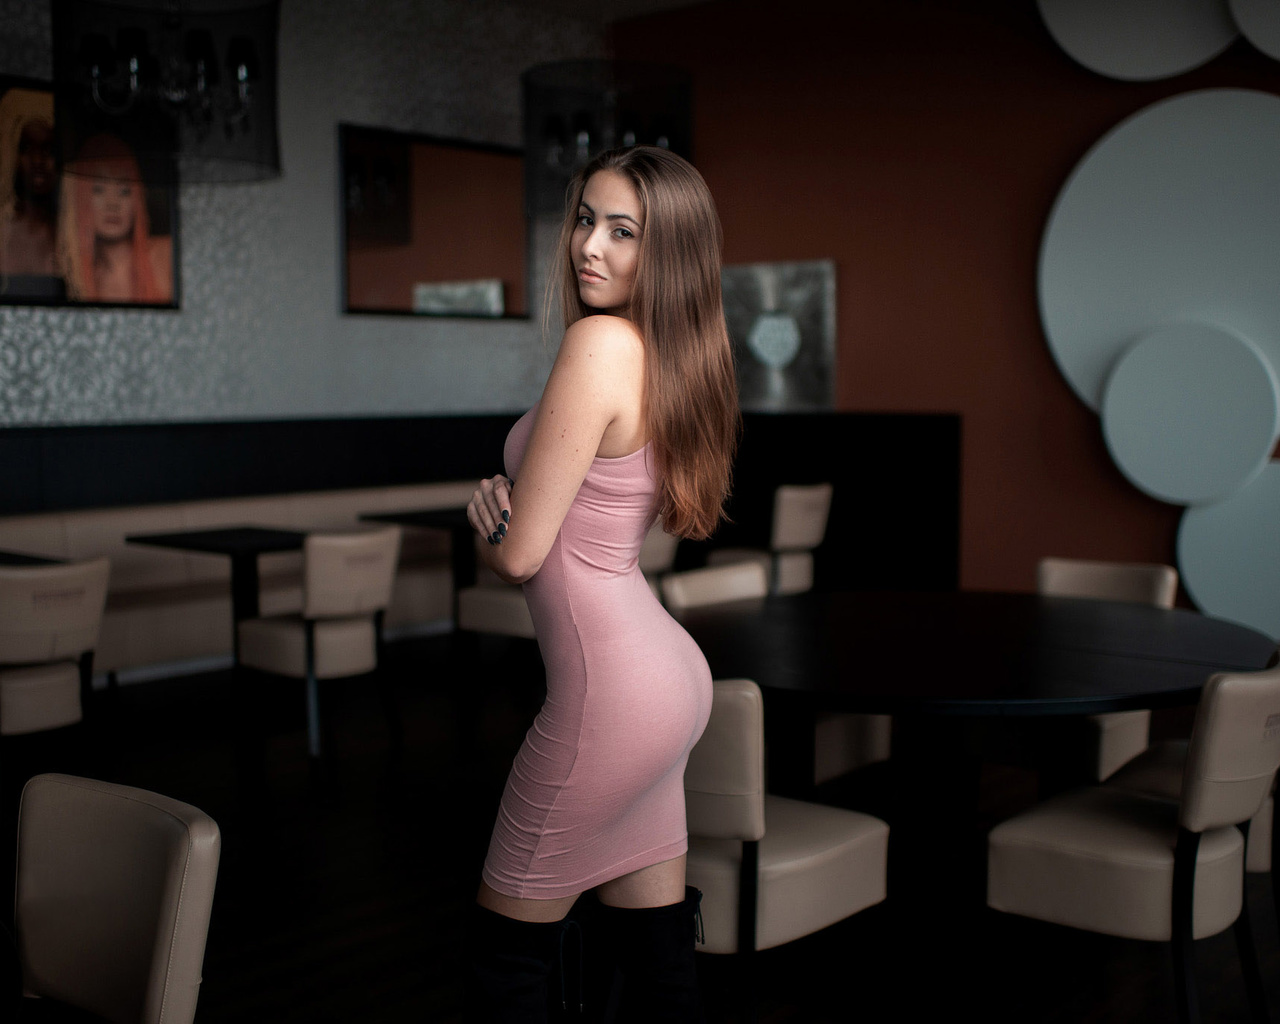 women, pink dress, knee-high boots, chair, table, black nails, tight dress, portrait